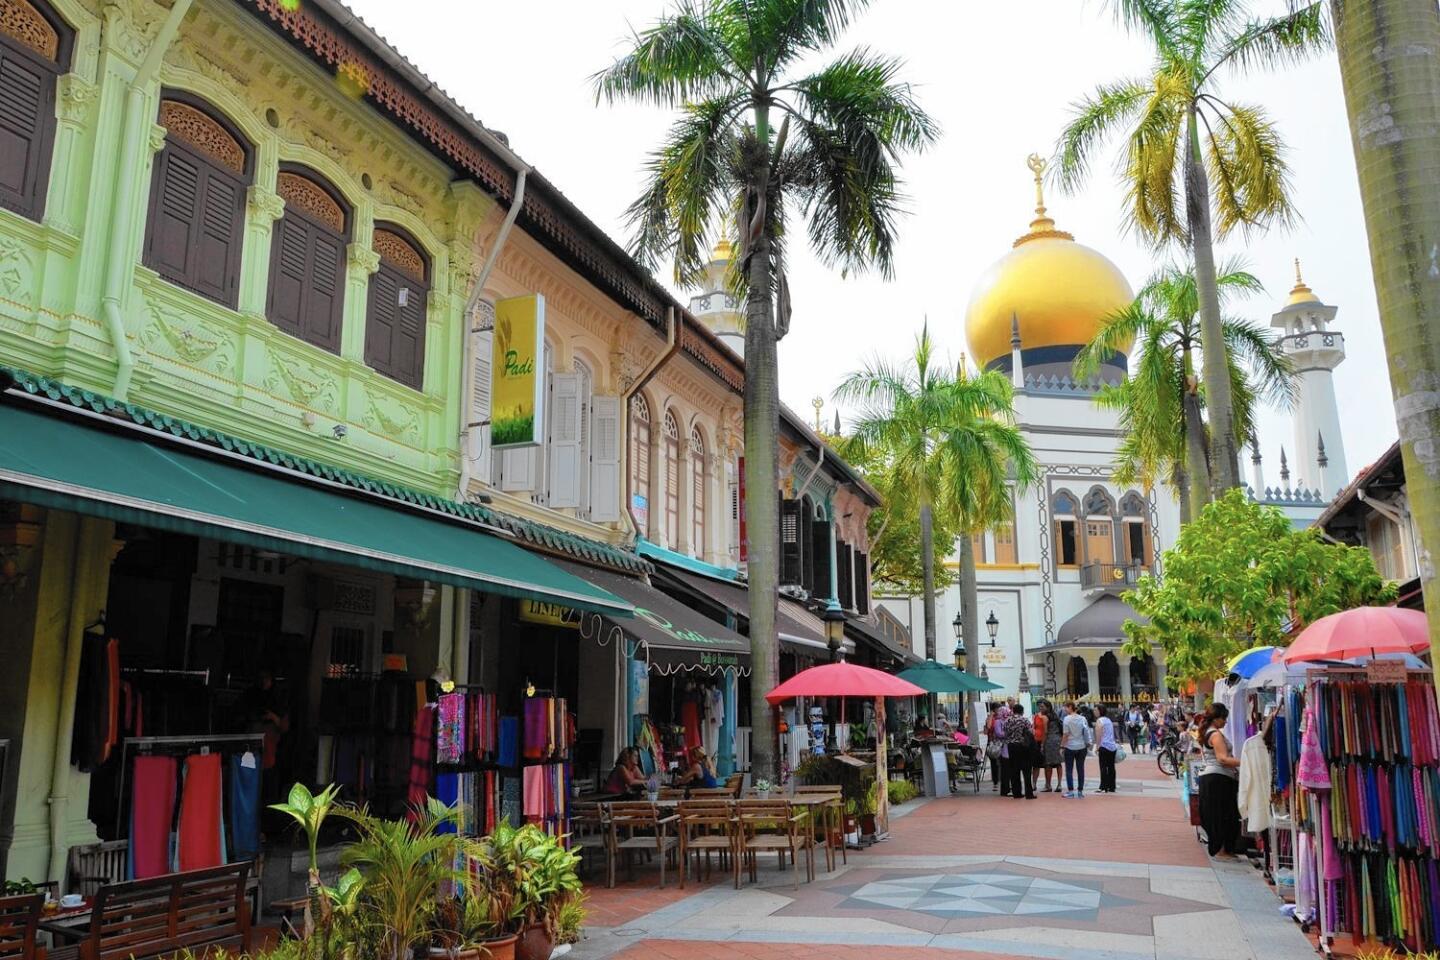 Colonial-era houses in the Kampong Glam neighborhood of Singapore.